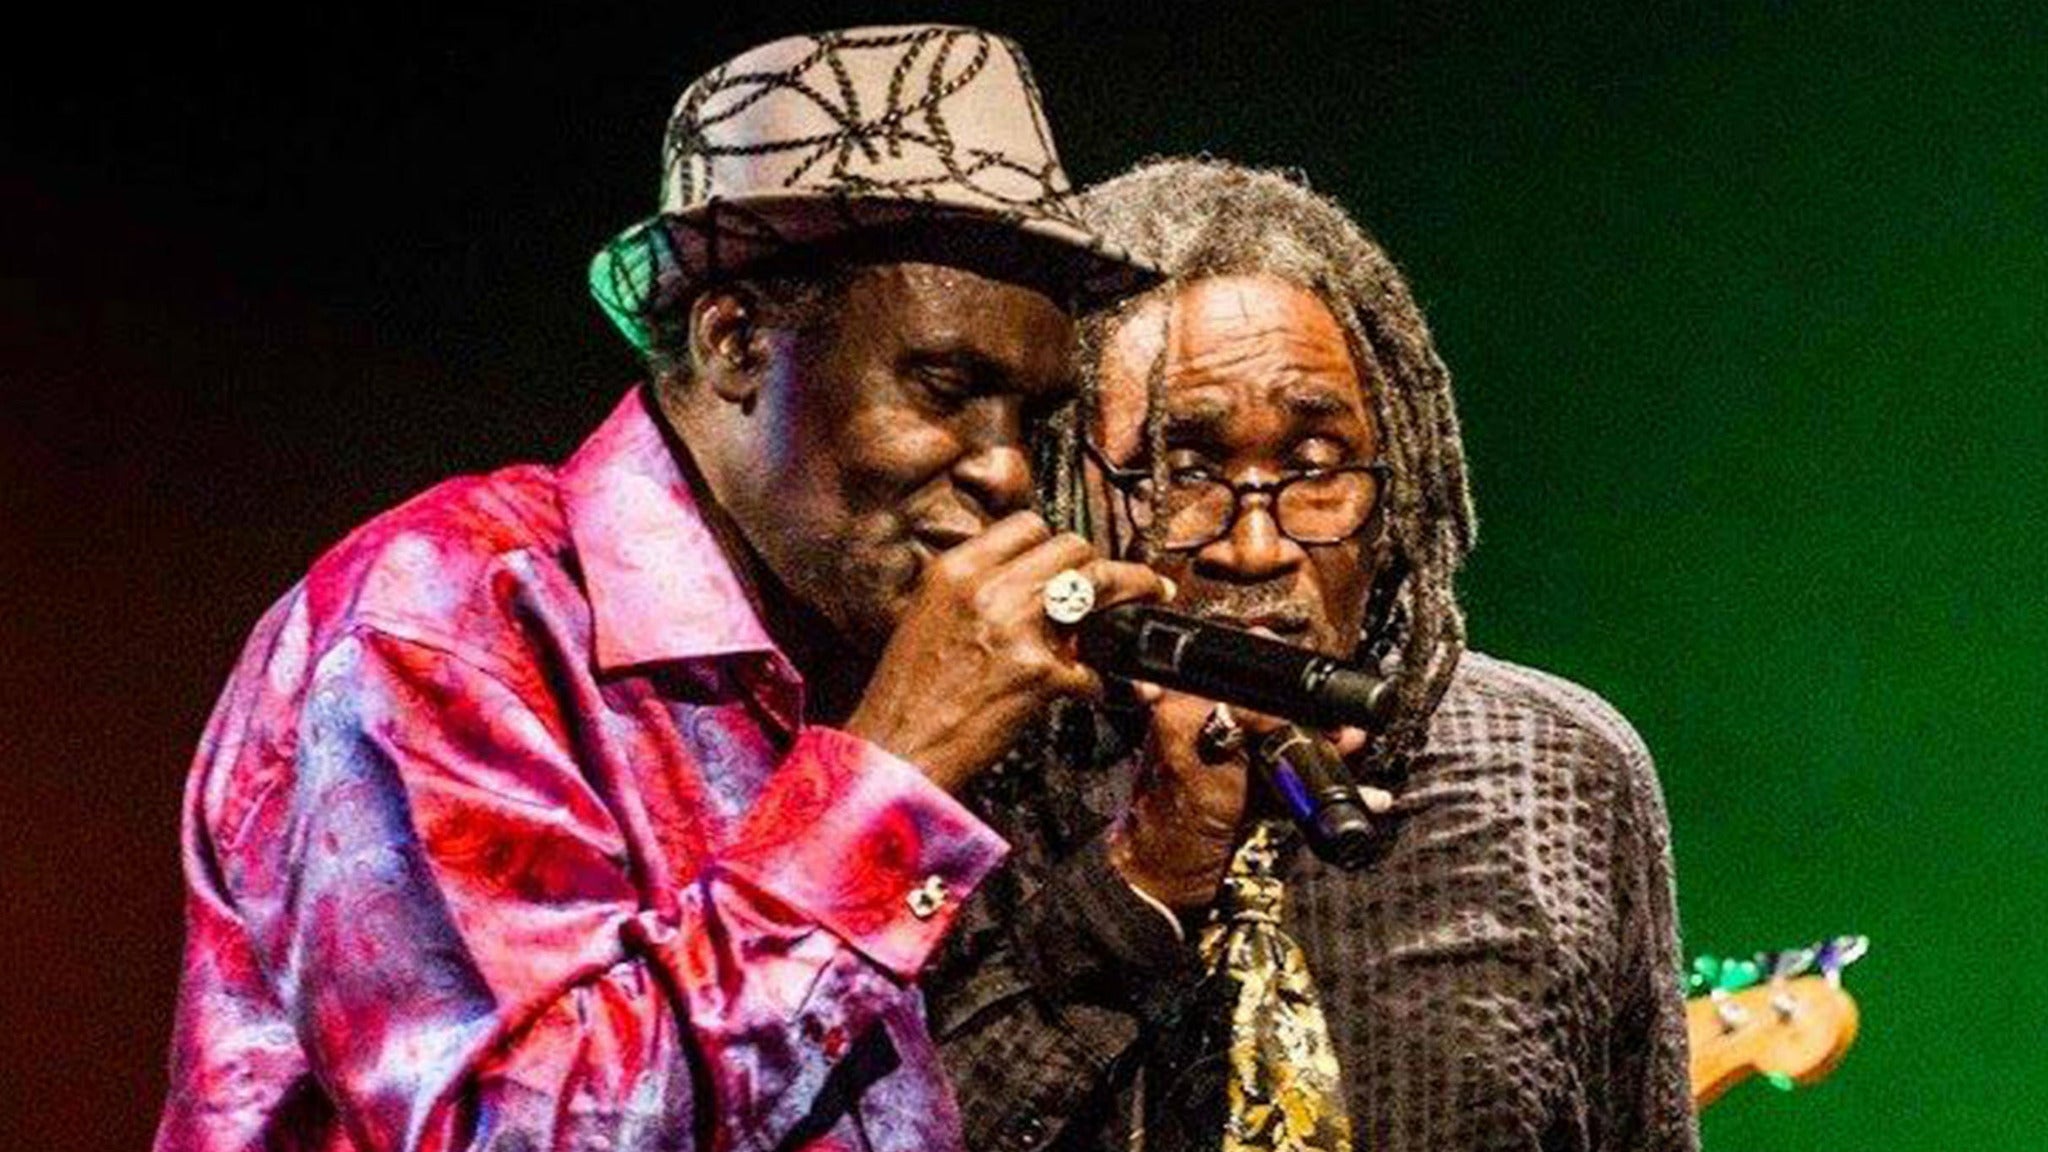 Image used with permission from Ticketmaster | Wailing Souls tickets